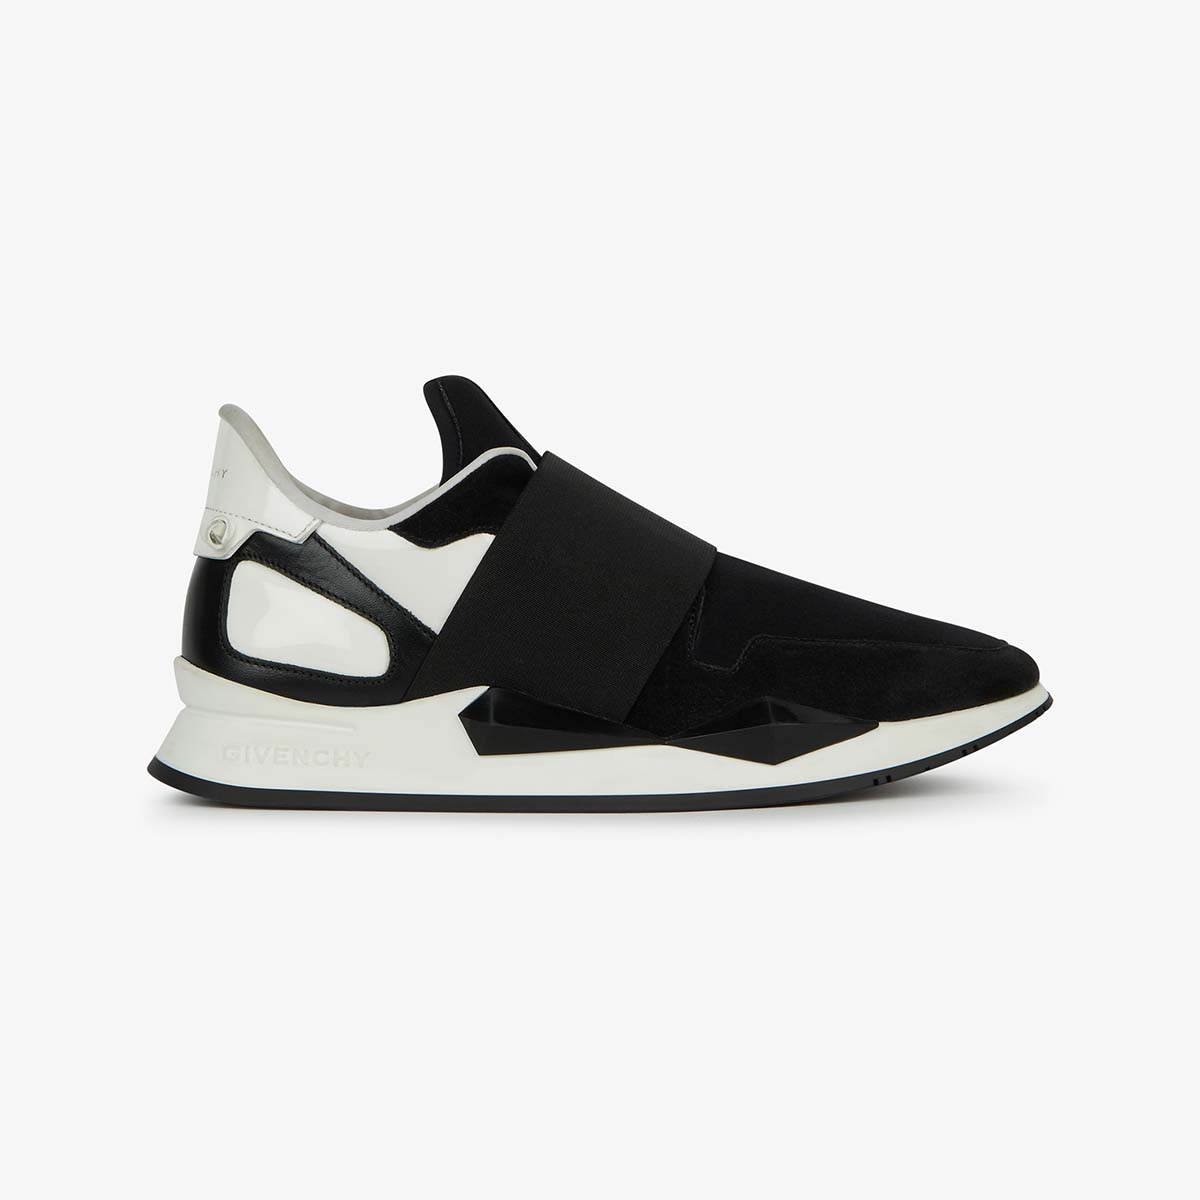 Givenchy Women Elastic Strap Sneakers in Leather Shoes Black